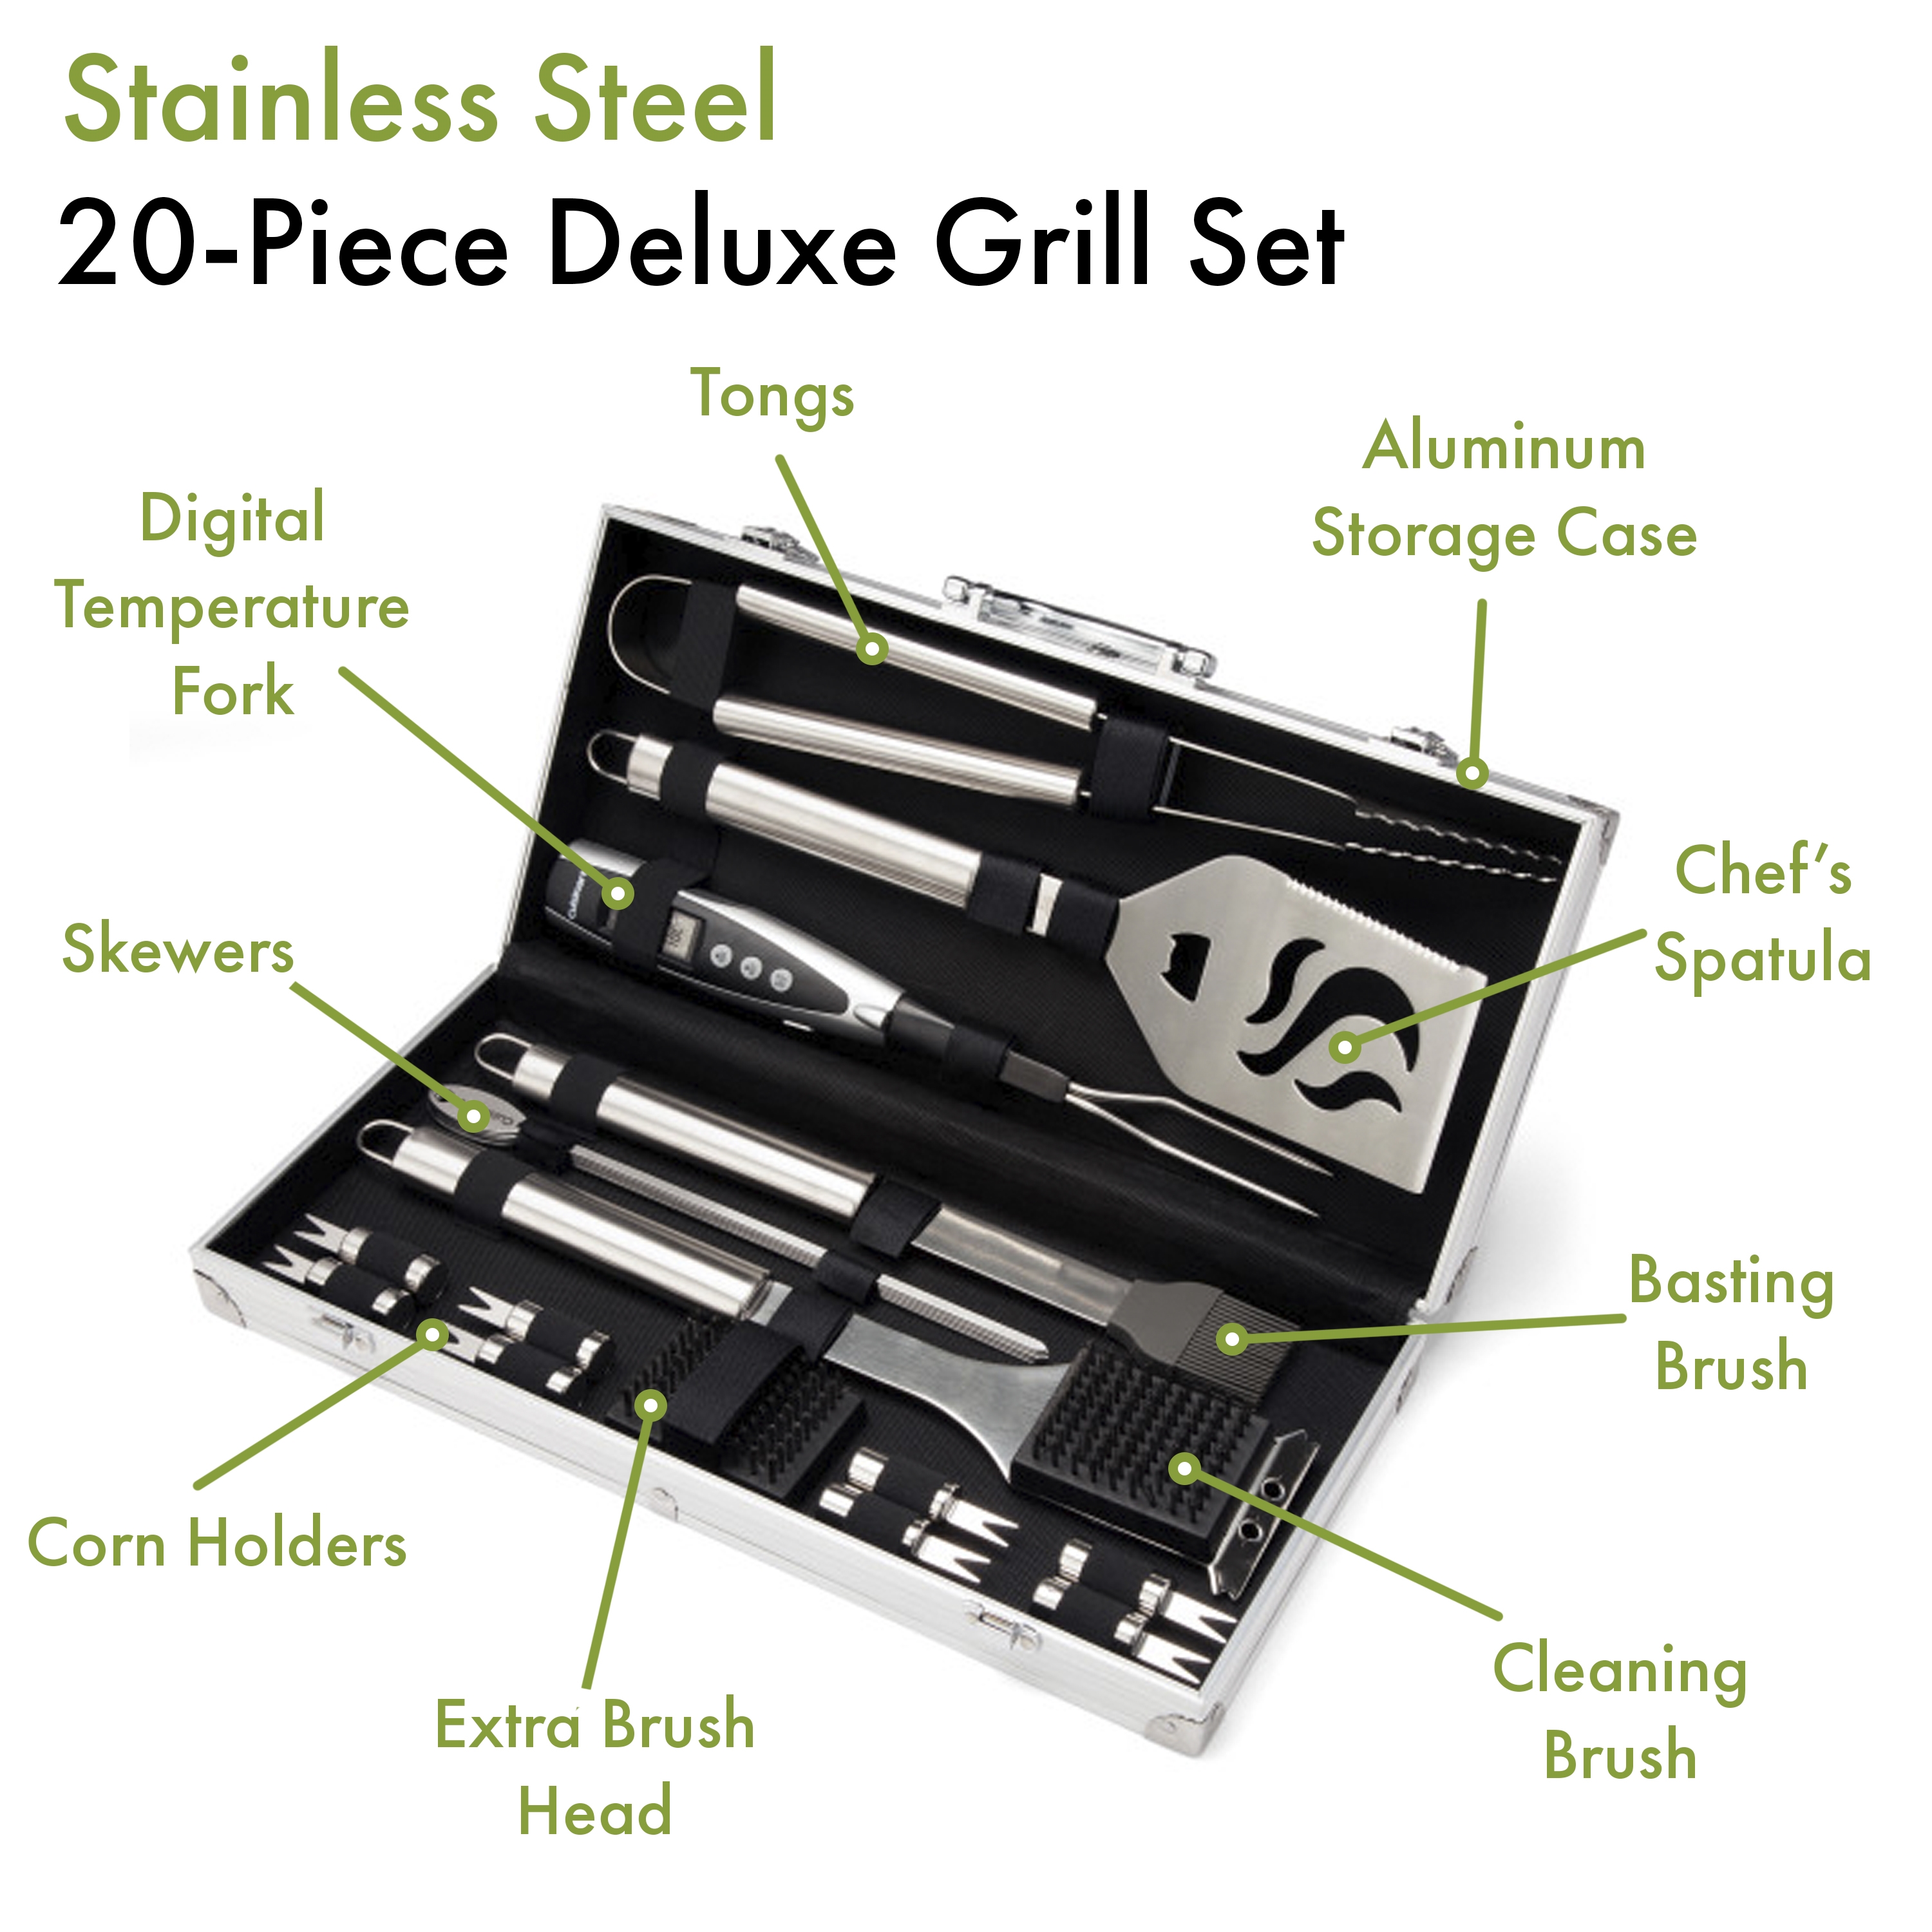 Deluxe Grill Set (20-Piece)